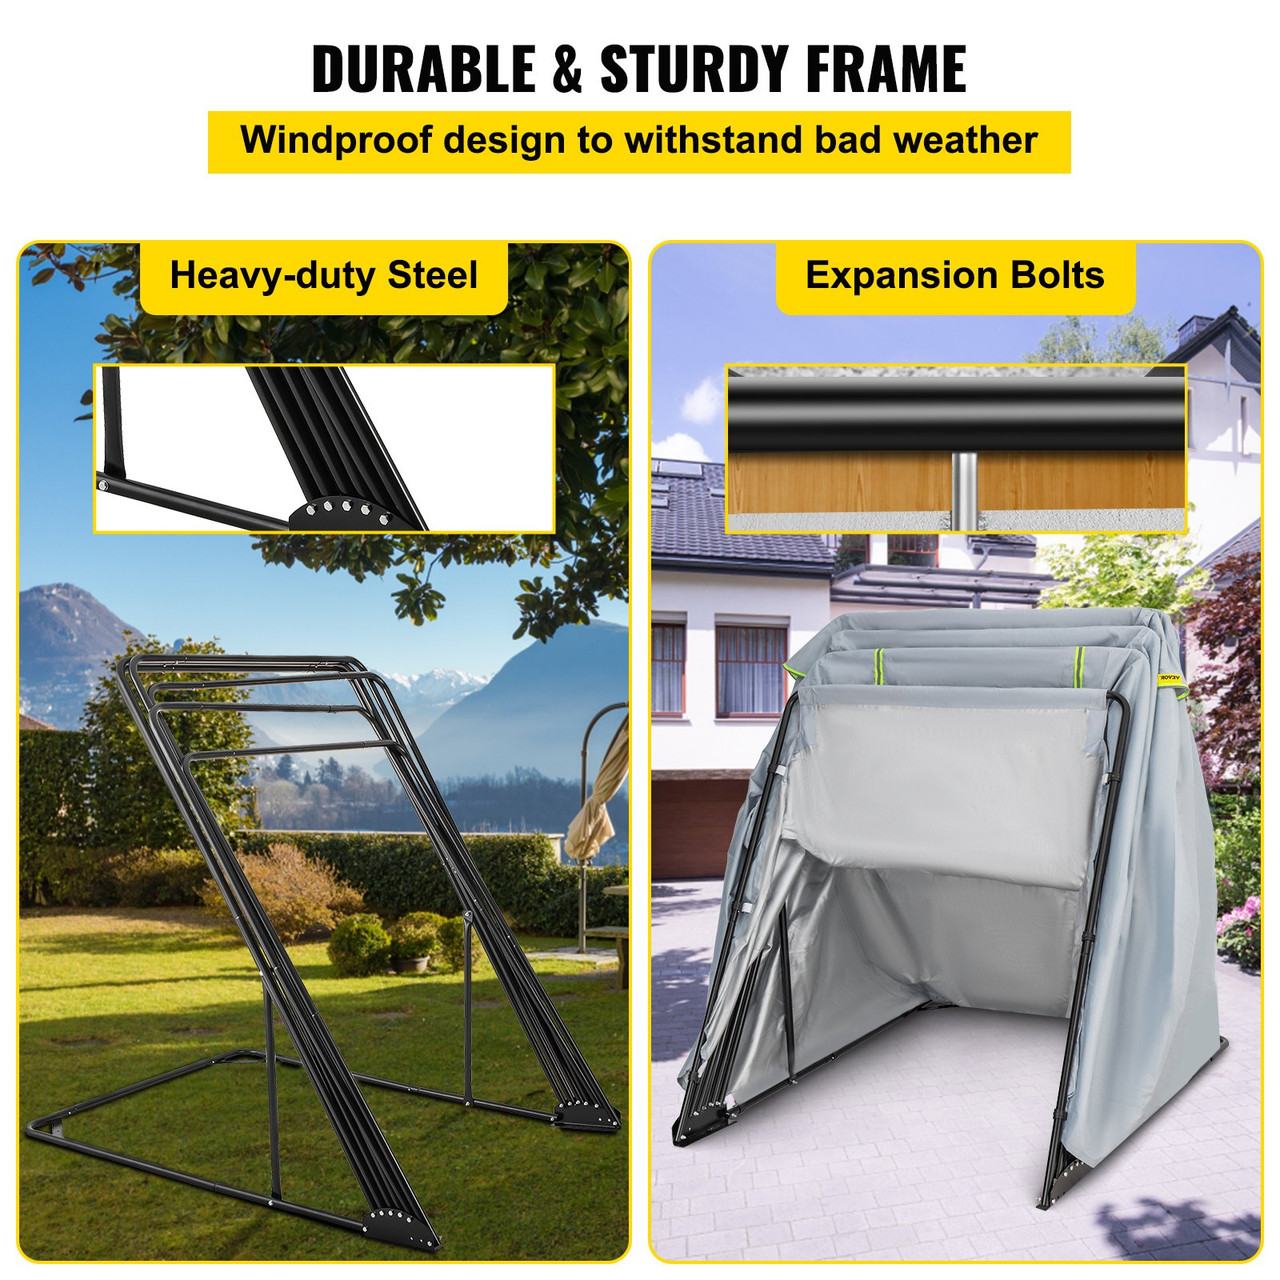 Motorcycle Shelter, Waterproof Motorcycle Cover, Heavy Duty Motorcycle Shelter Shed, 420D Oxford Motorbike Shed Anti-UV, 110.2"x41.3"x63.8" Grey Shelter Storage Garage Tent w/Lock & Weight Bag